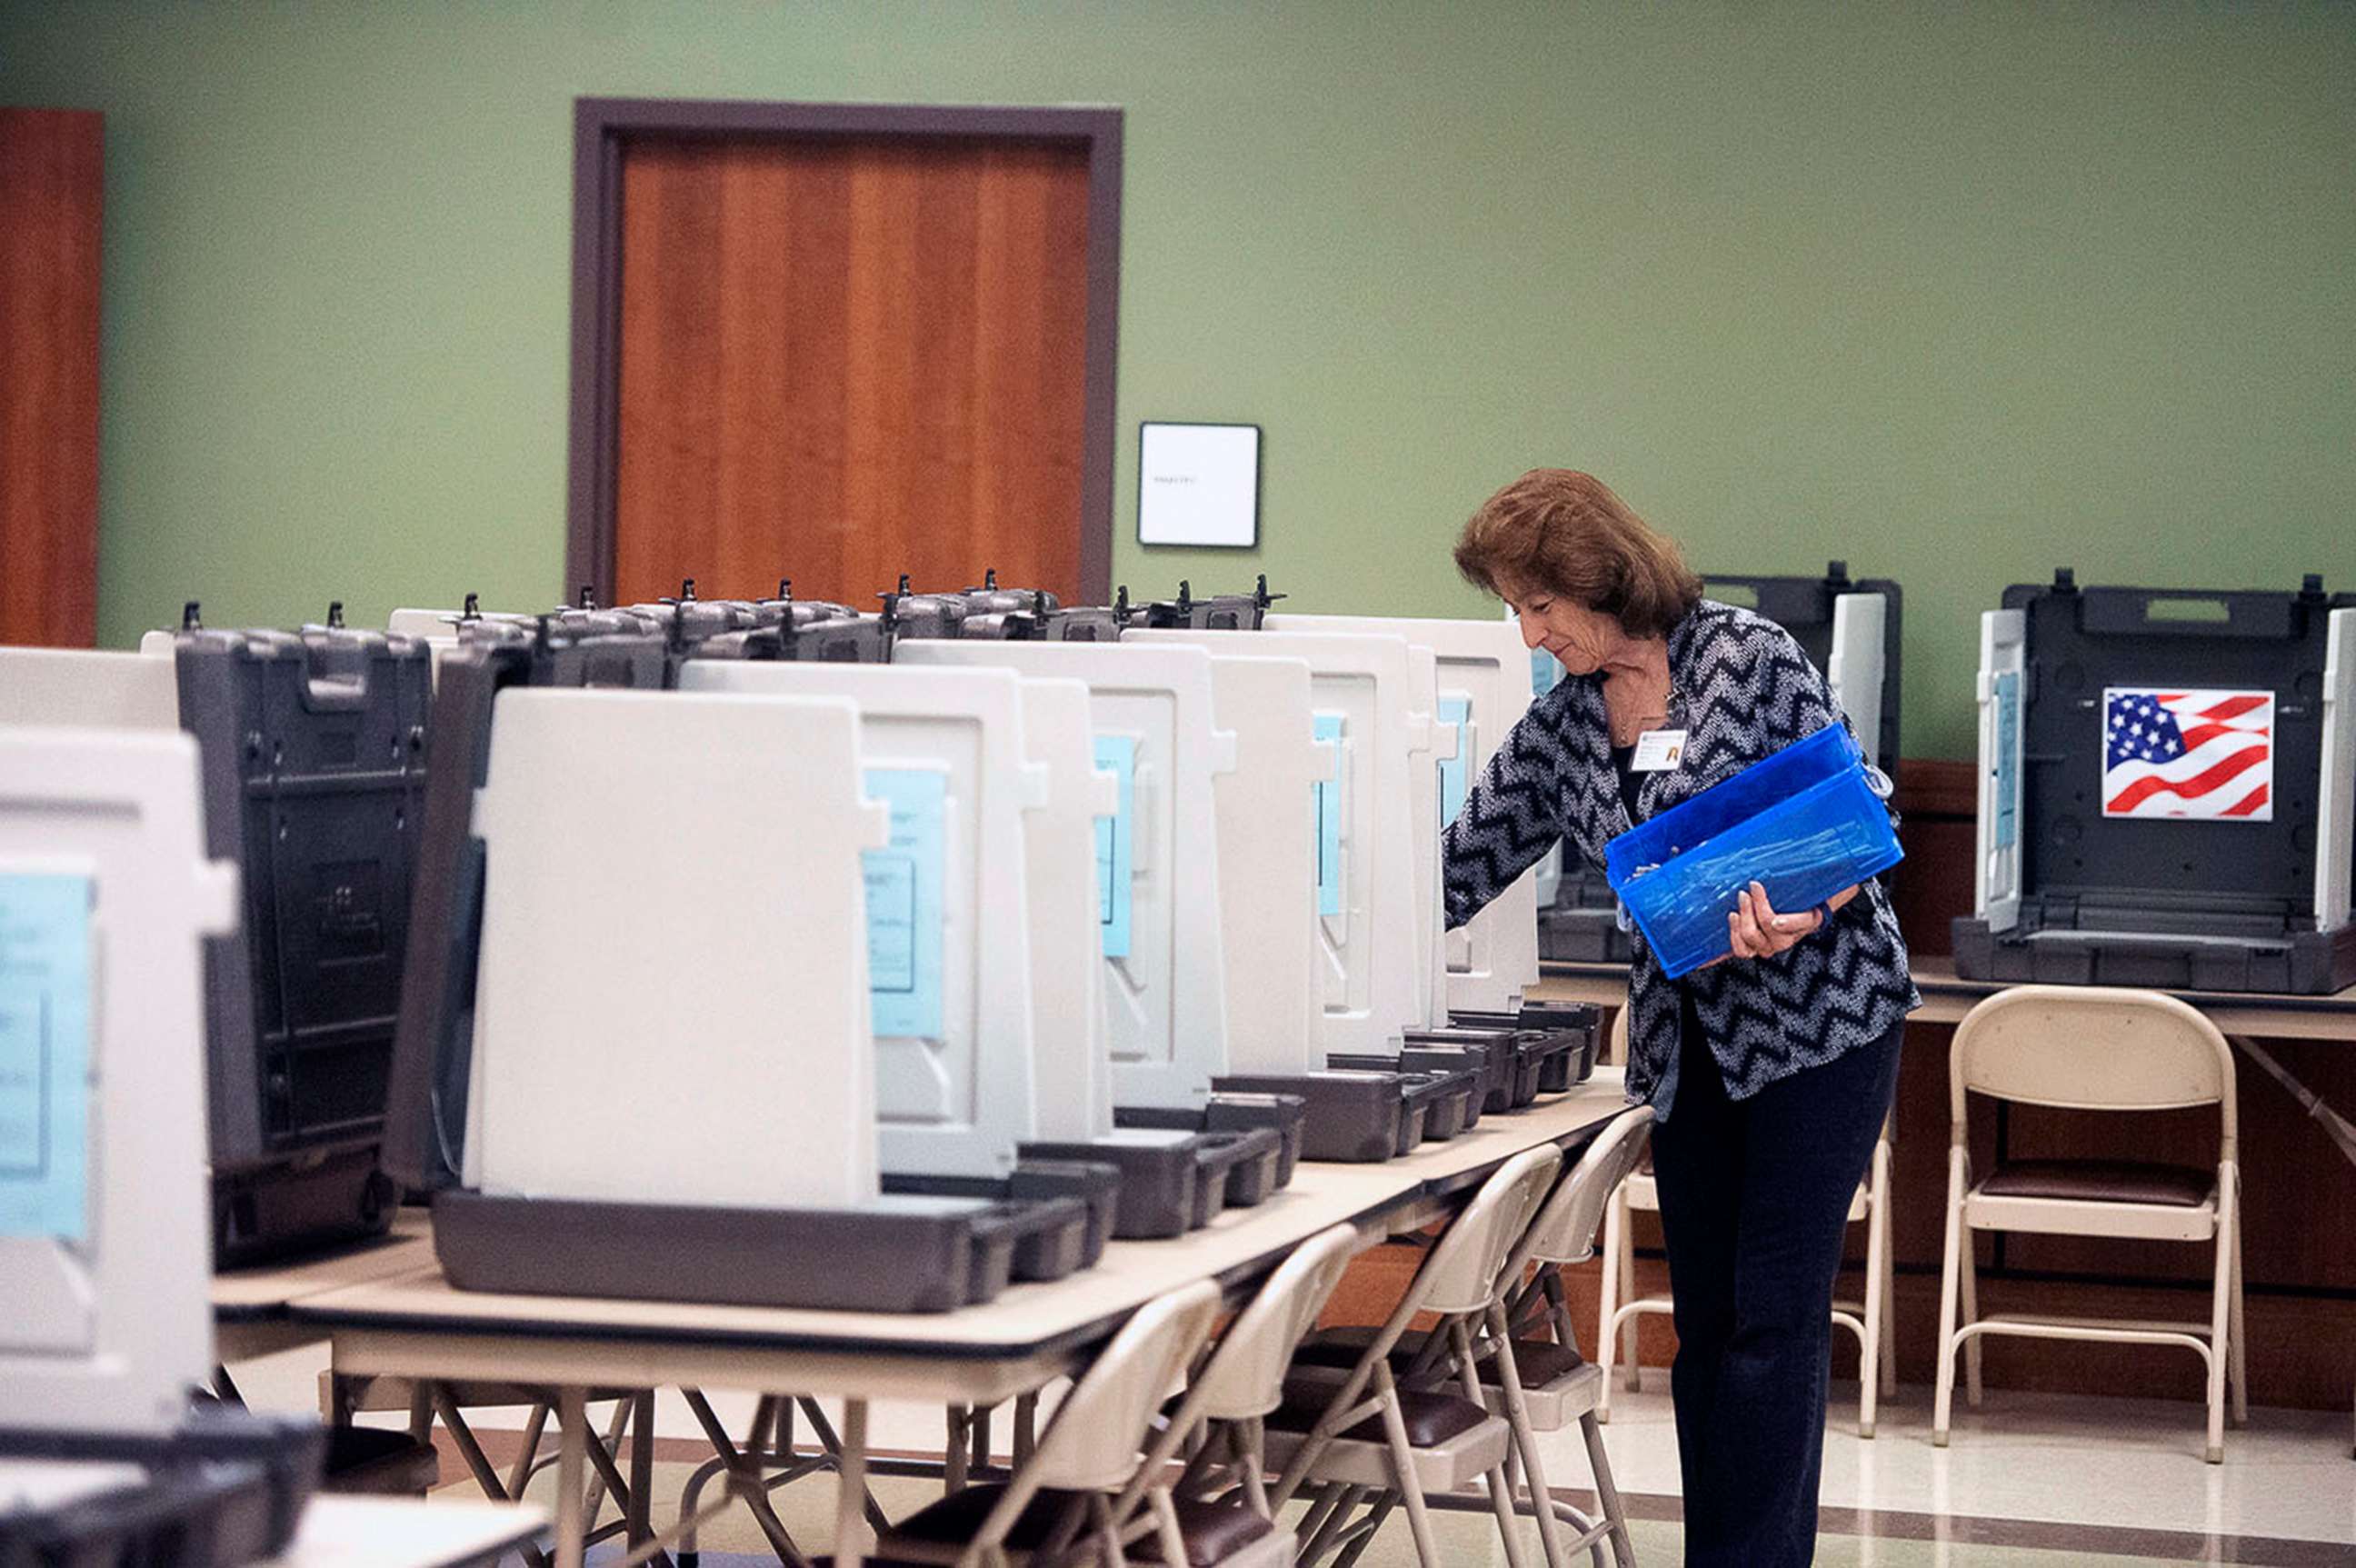 PHOTO: A County Elections Commission worker prepares voter booths ahead of early voting in Nacogdoches, Tx., Oct. 19, 2018